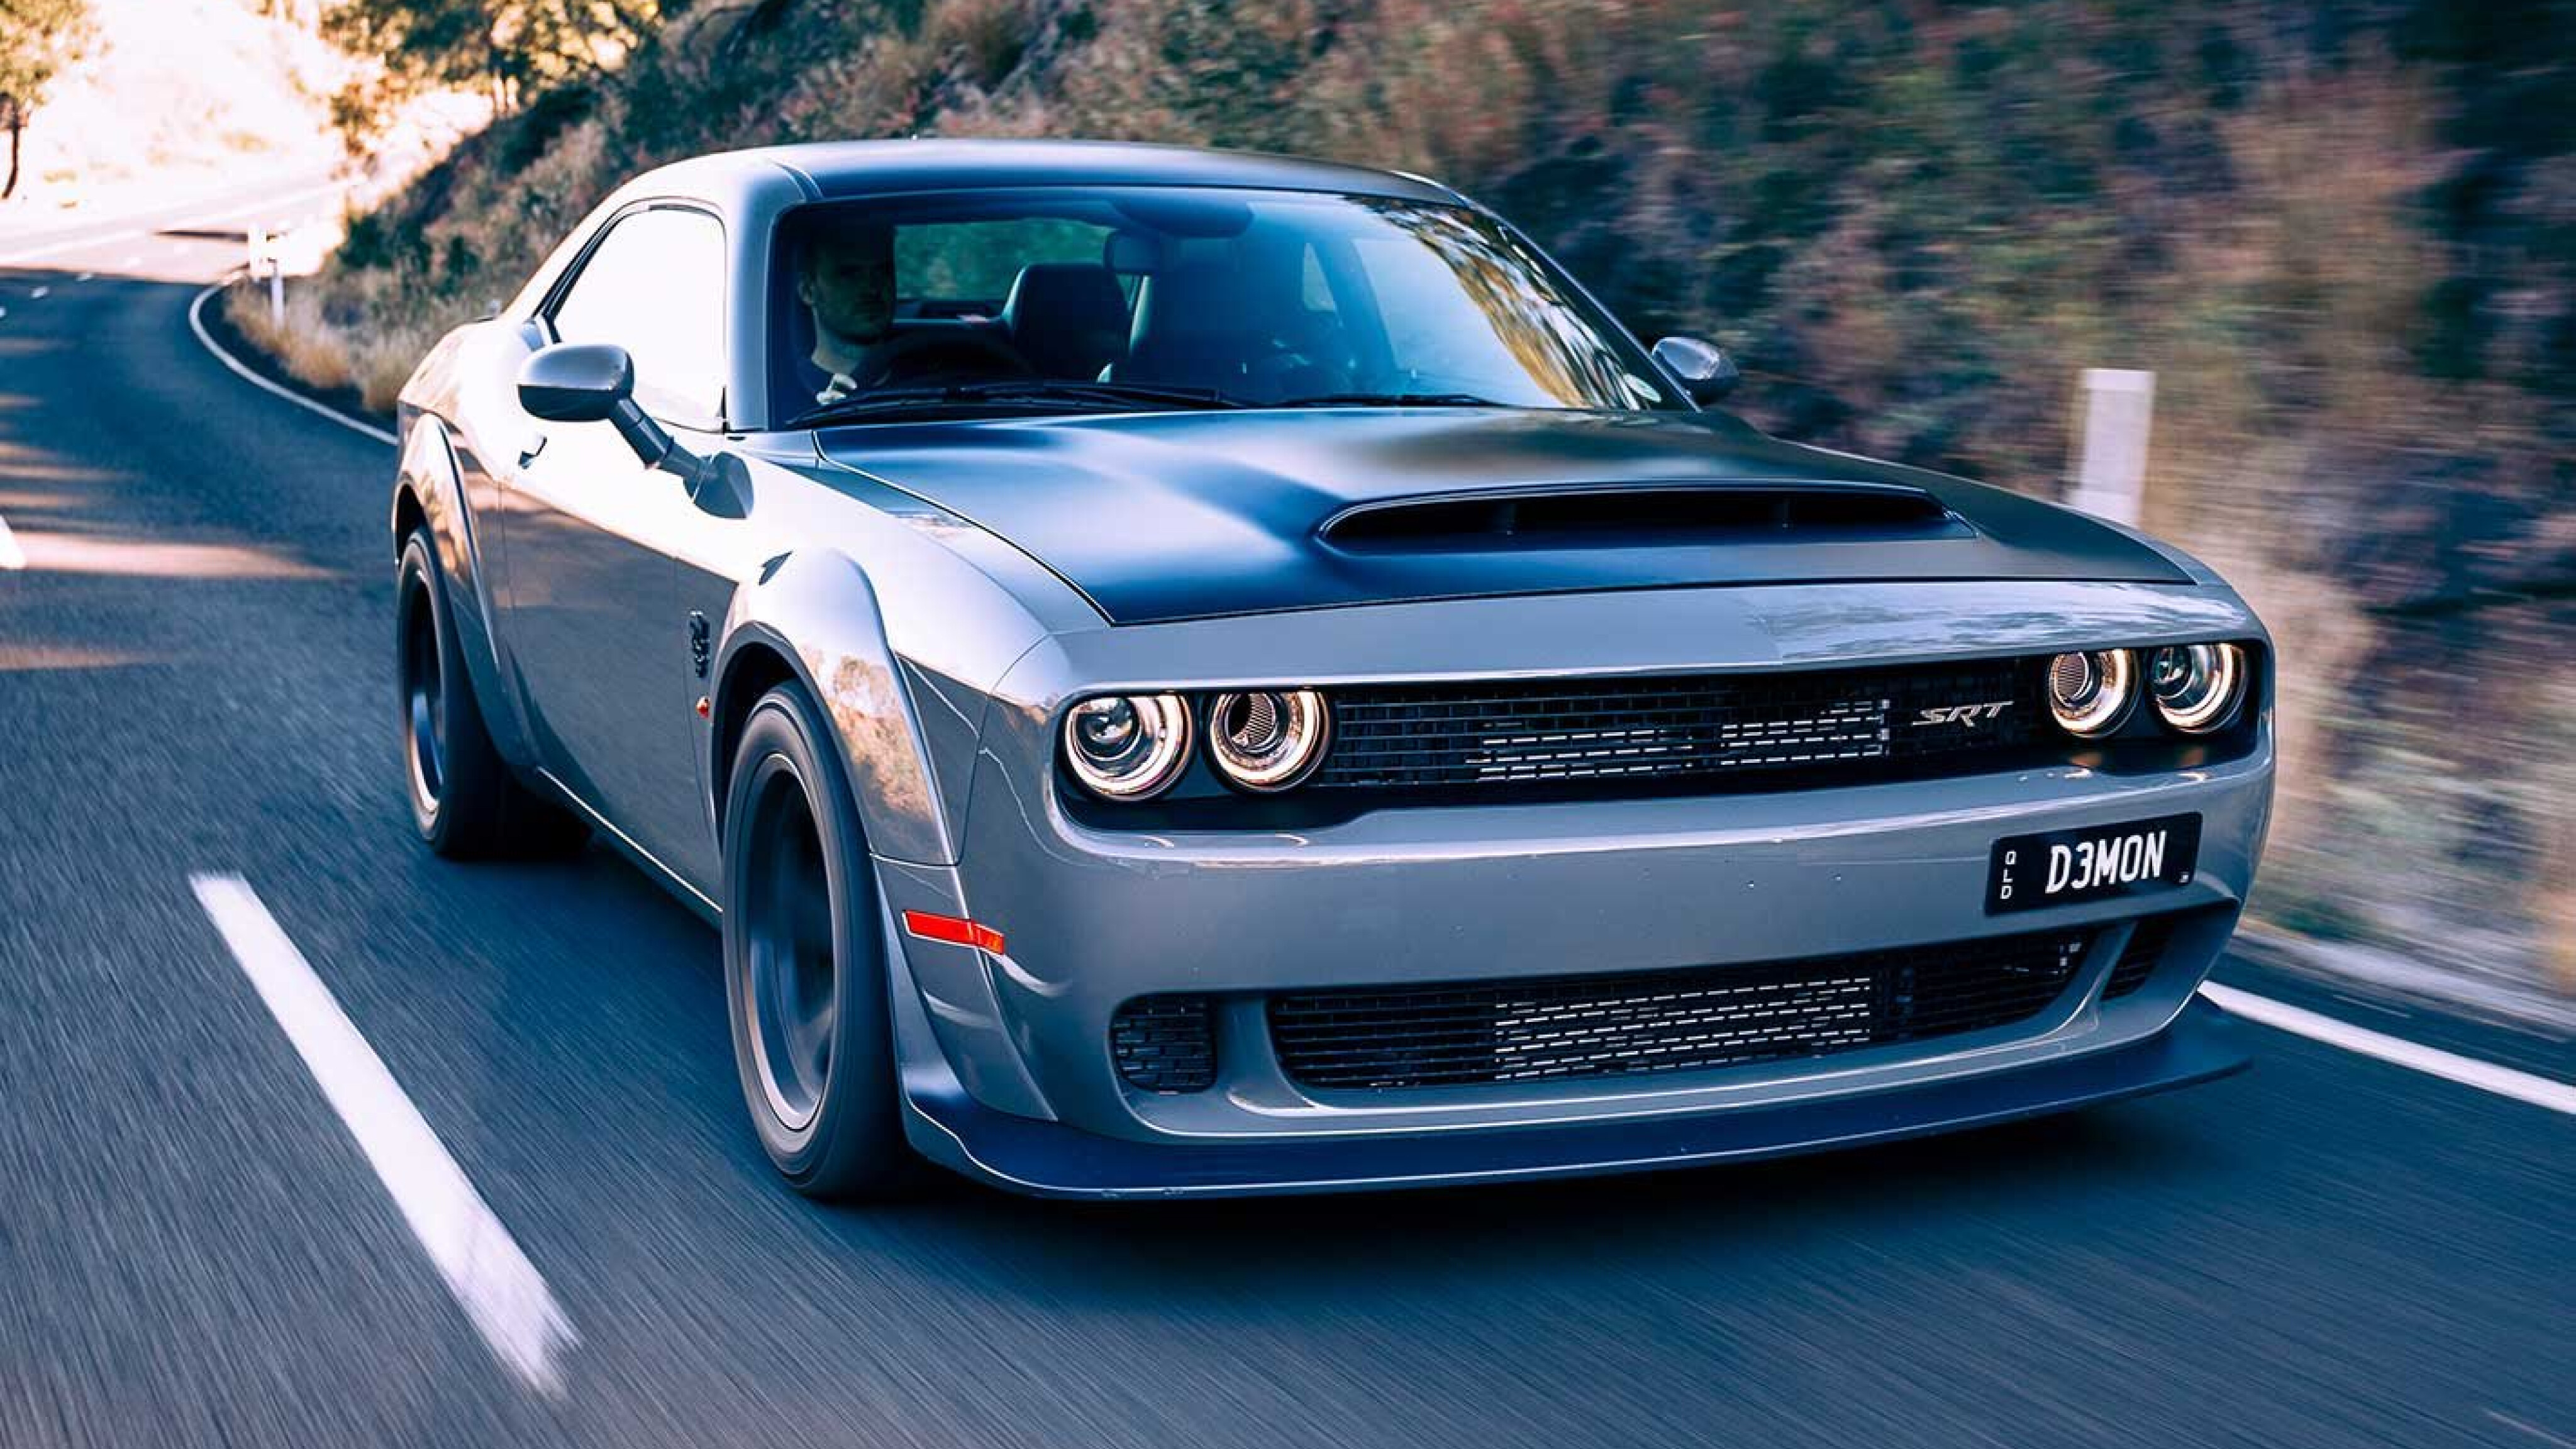 Unleashing Power and Reliability: Exploring Used Dodge Engines